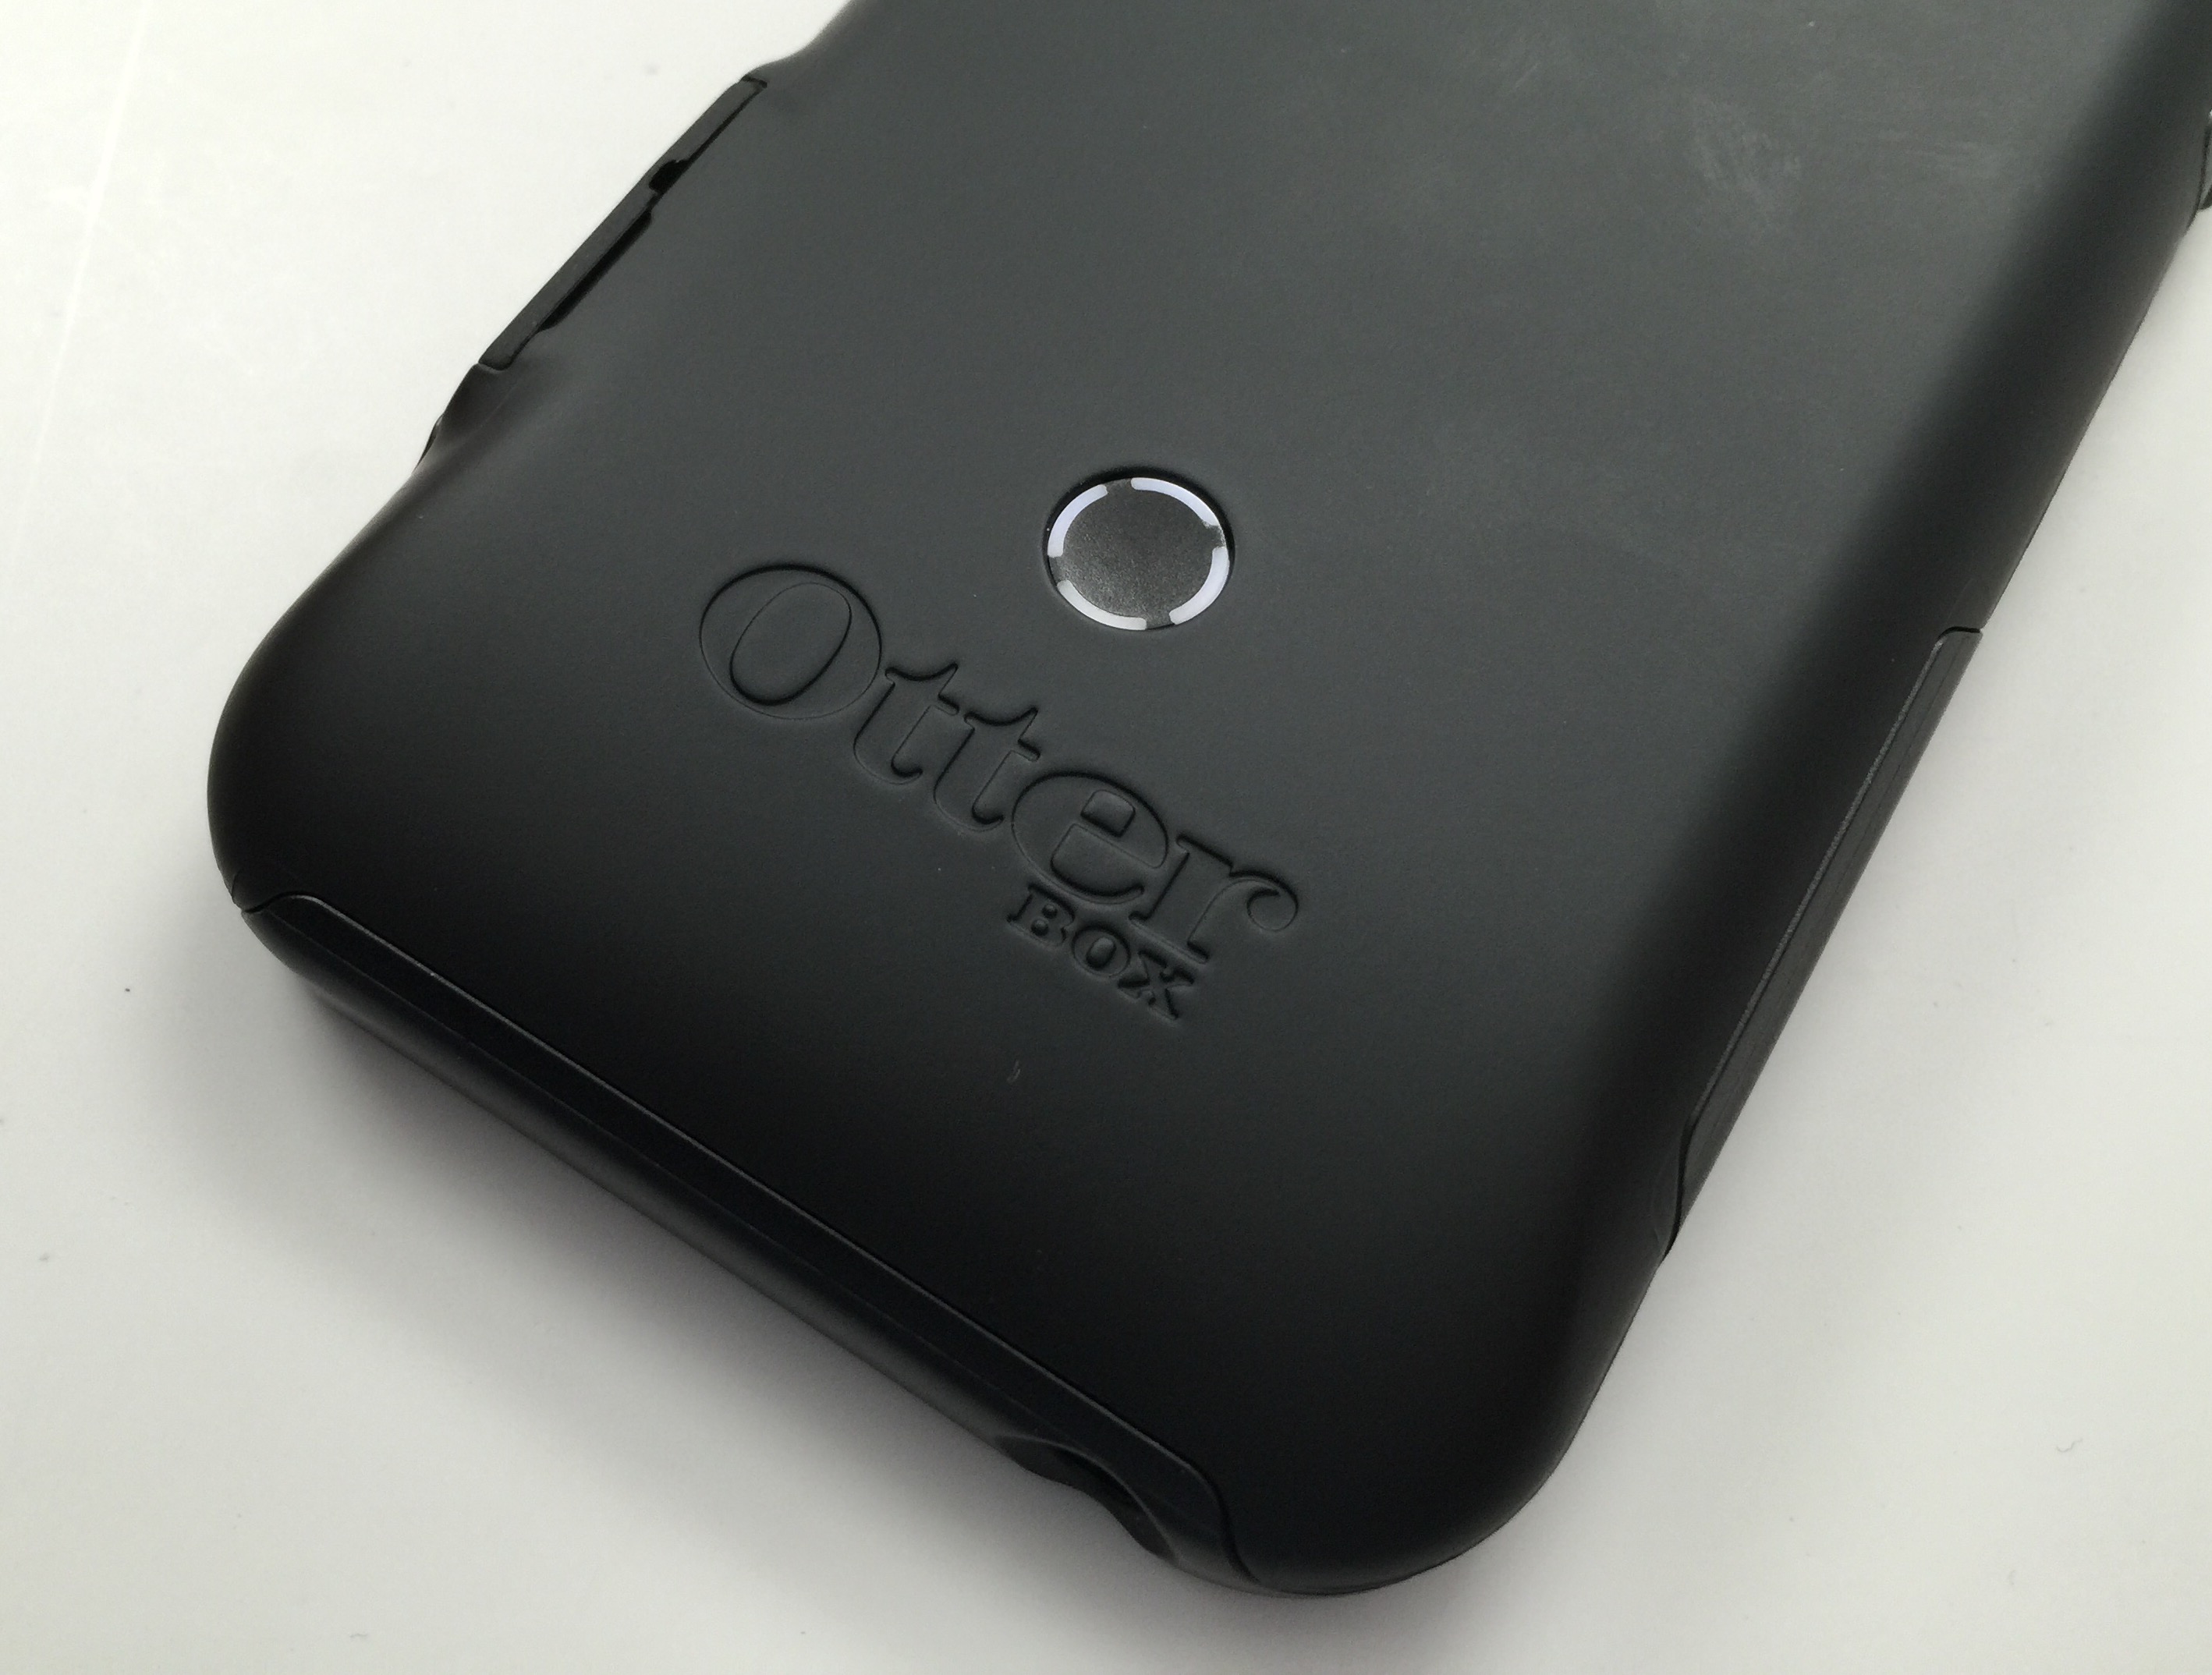 The OtterBox Resurgence case delivers power and protection.